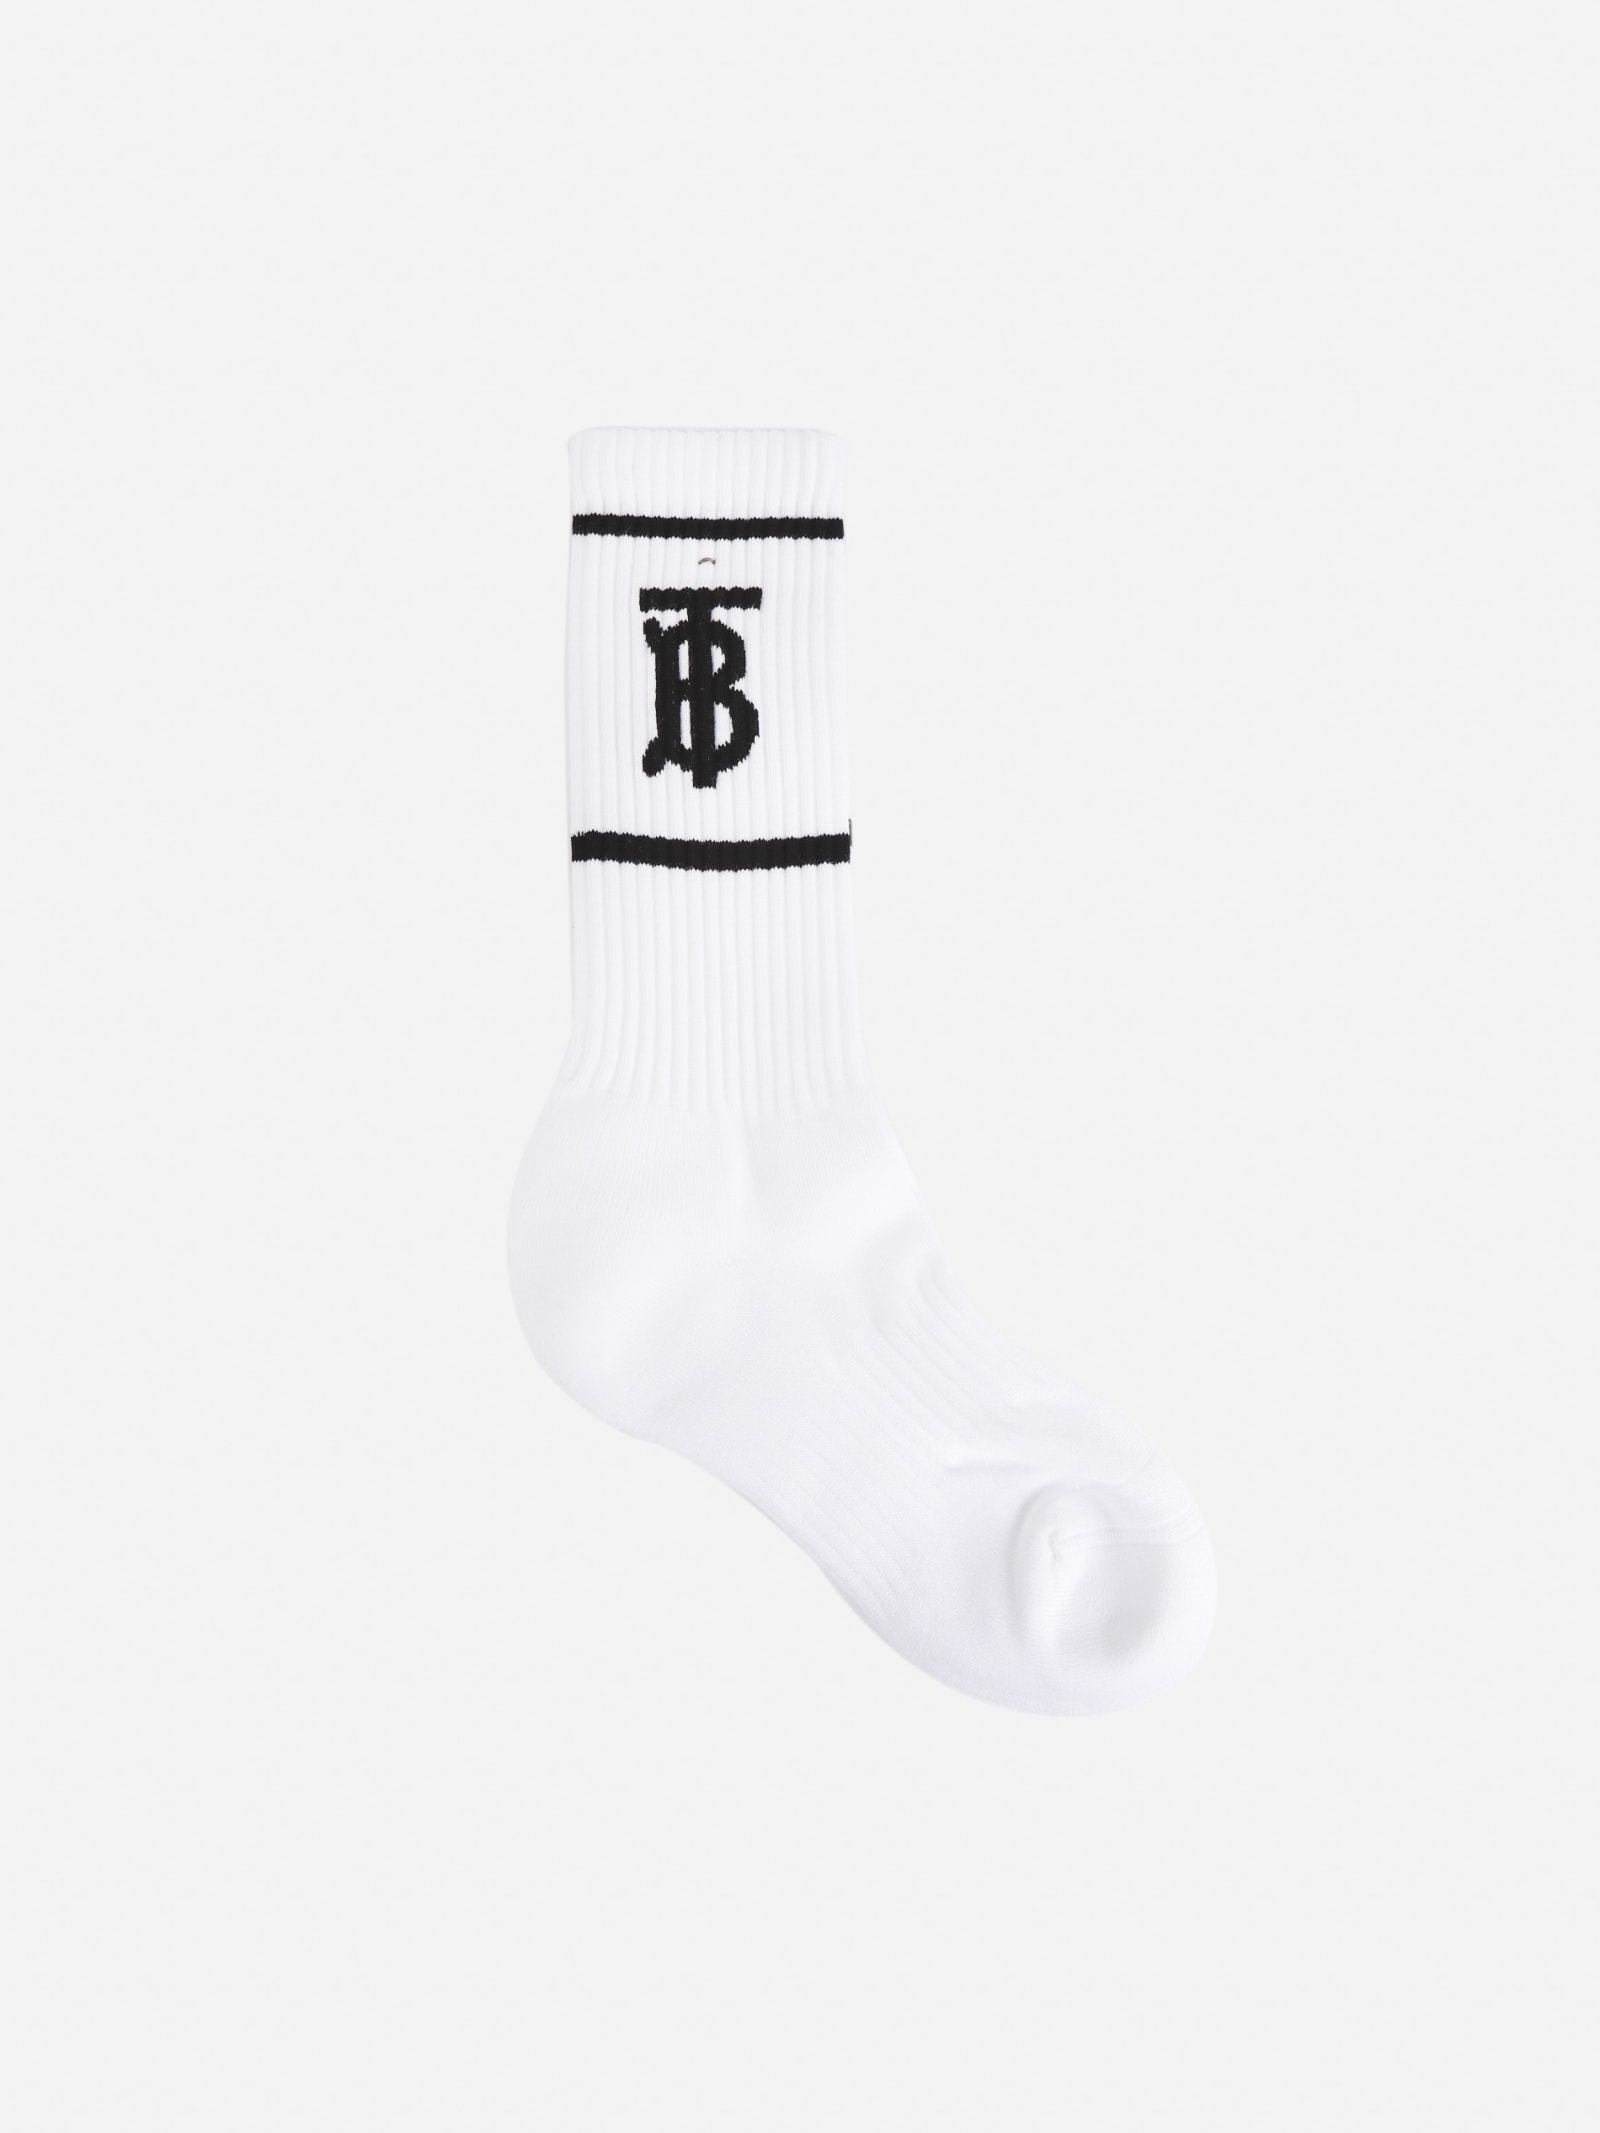 Burberry White And Black Blend Cotton Socks With Logo